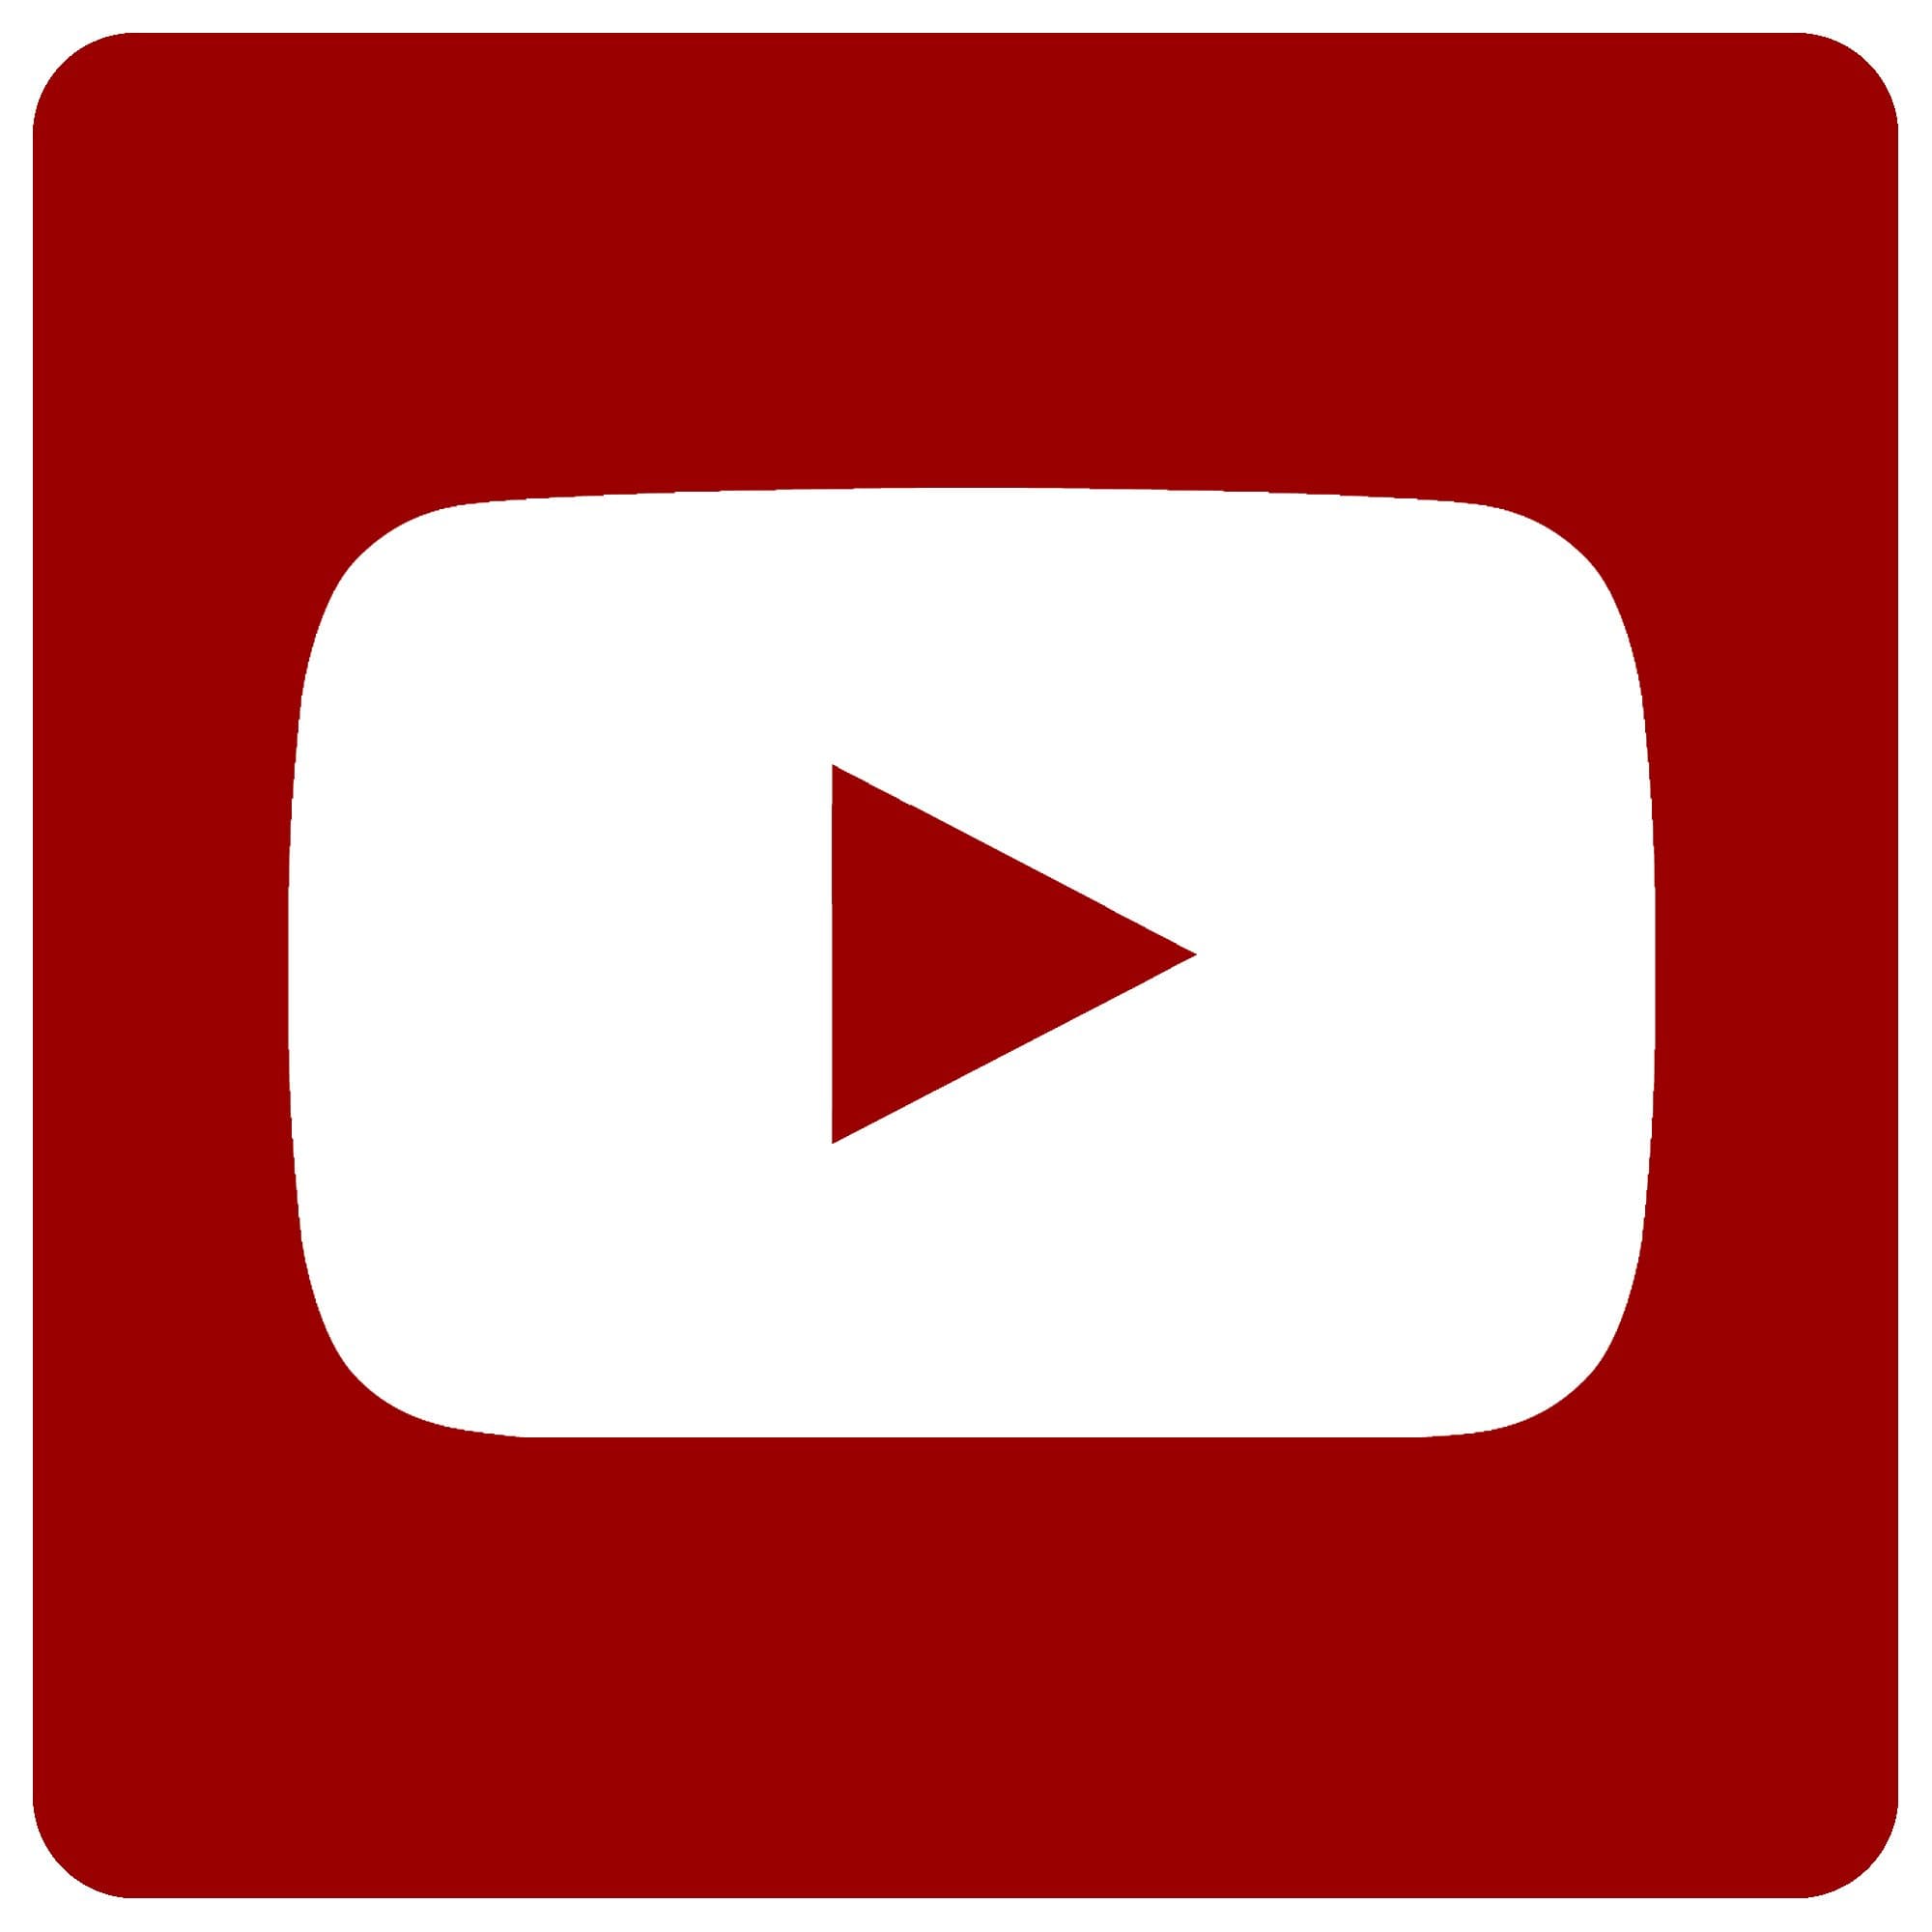 youtube icon downloader free download for windows 7 64 bit